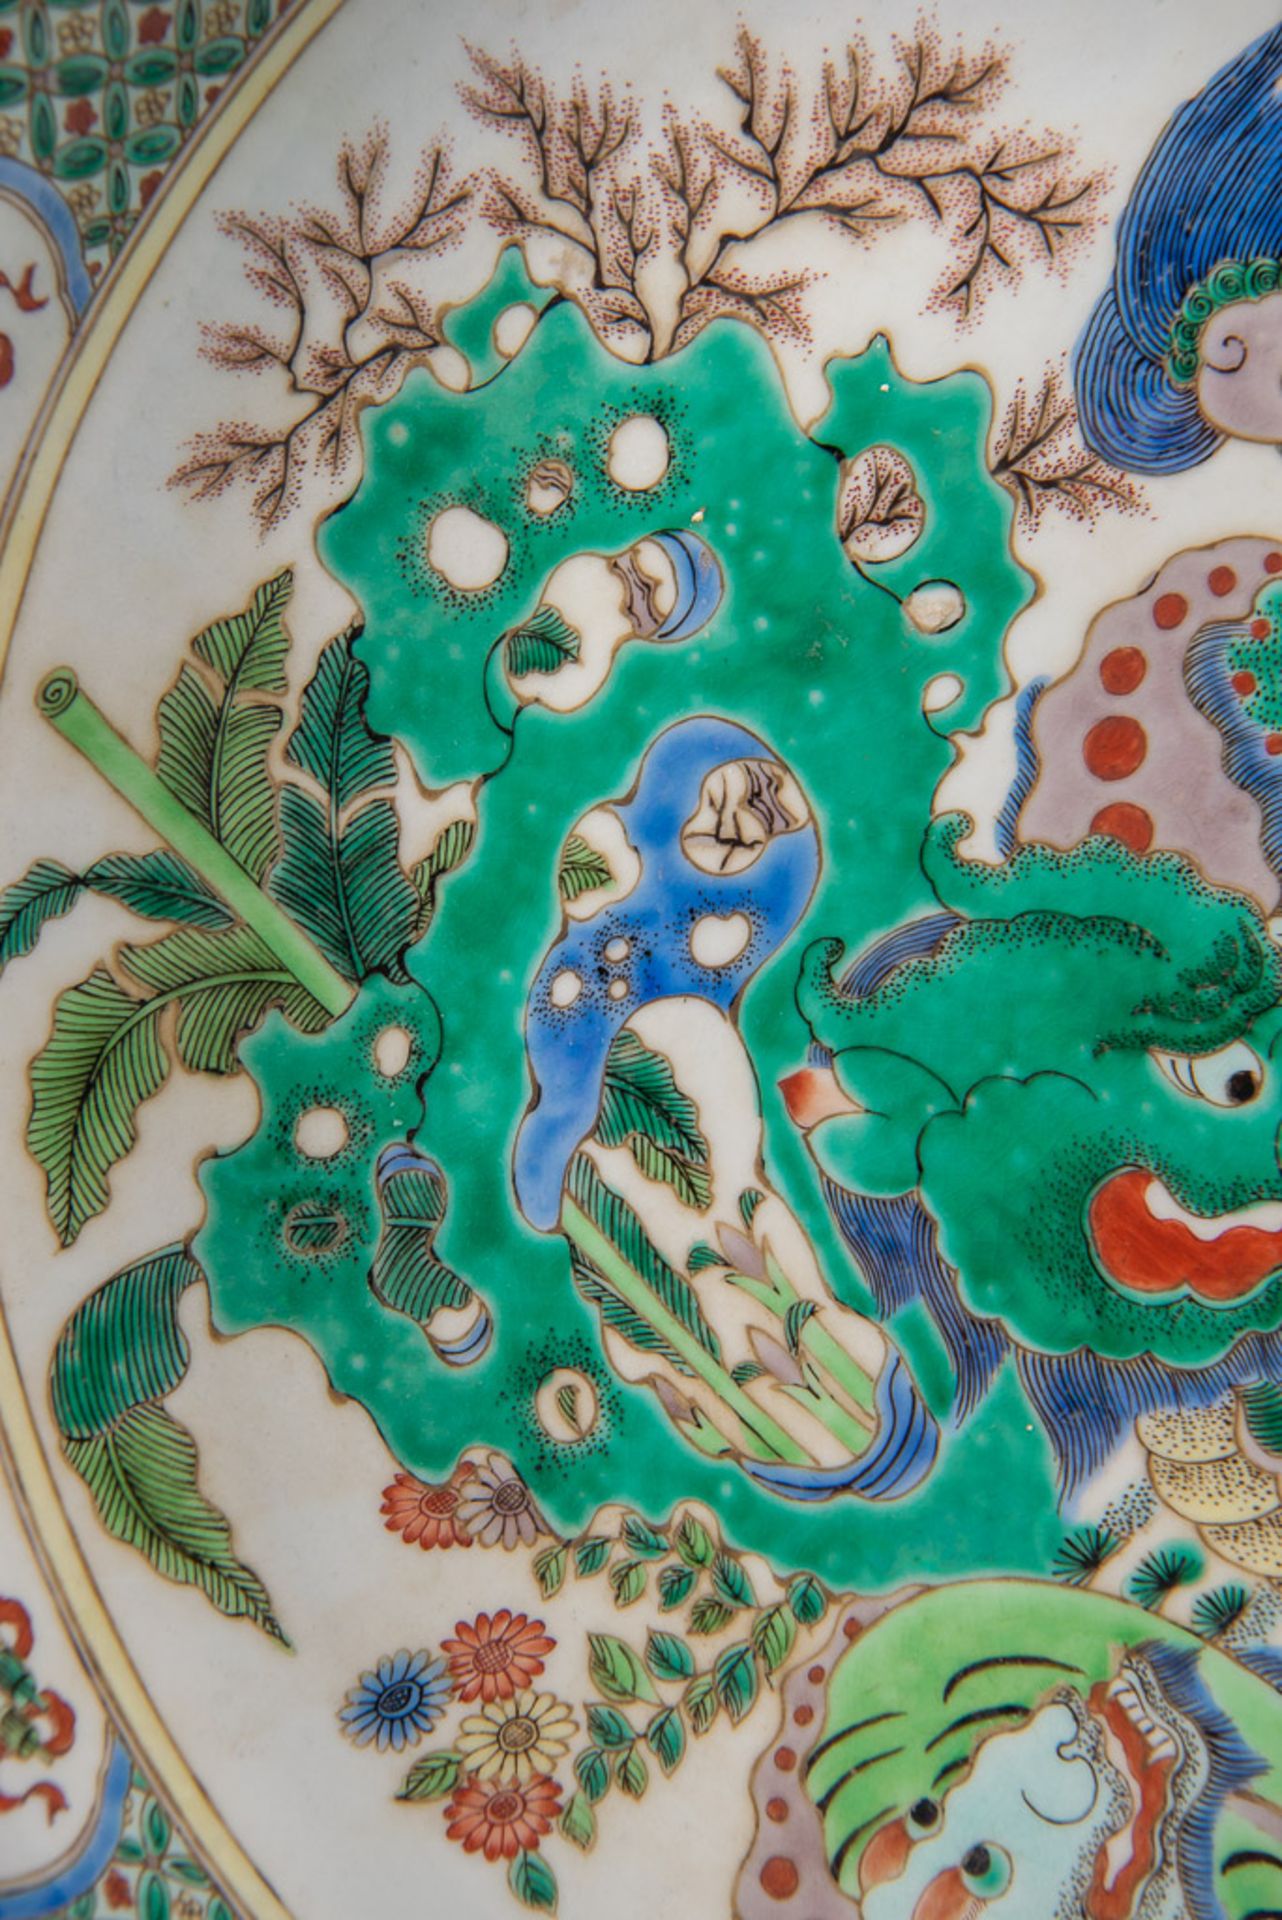 Display plate Wucai with dragons - Image 6 of 12